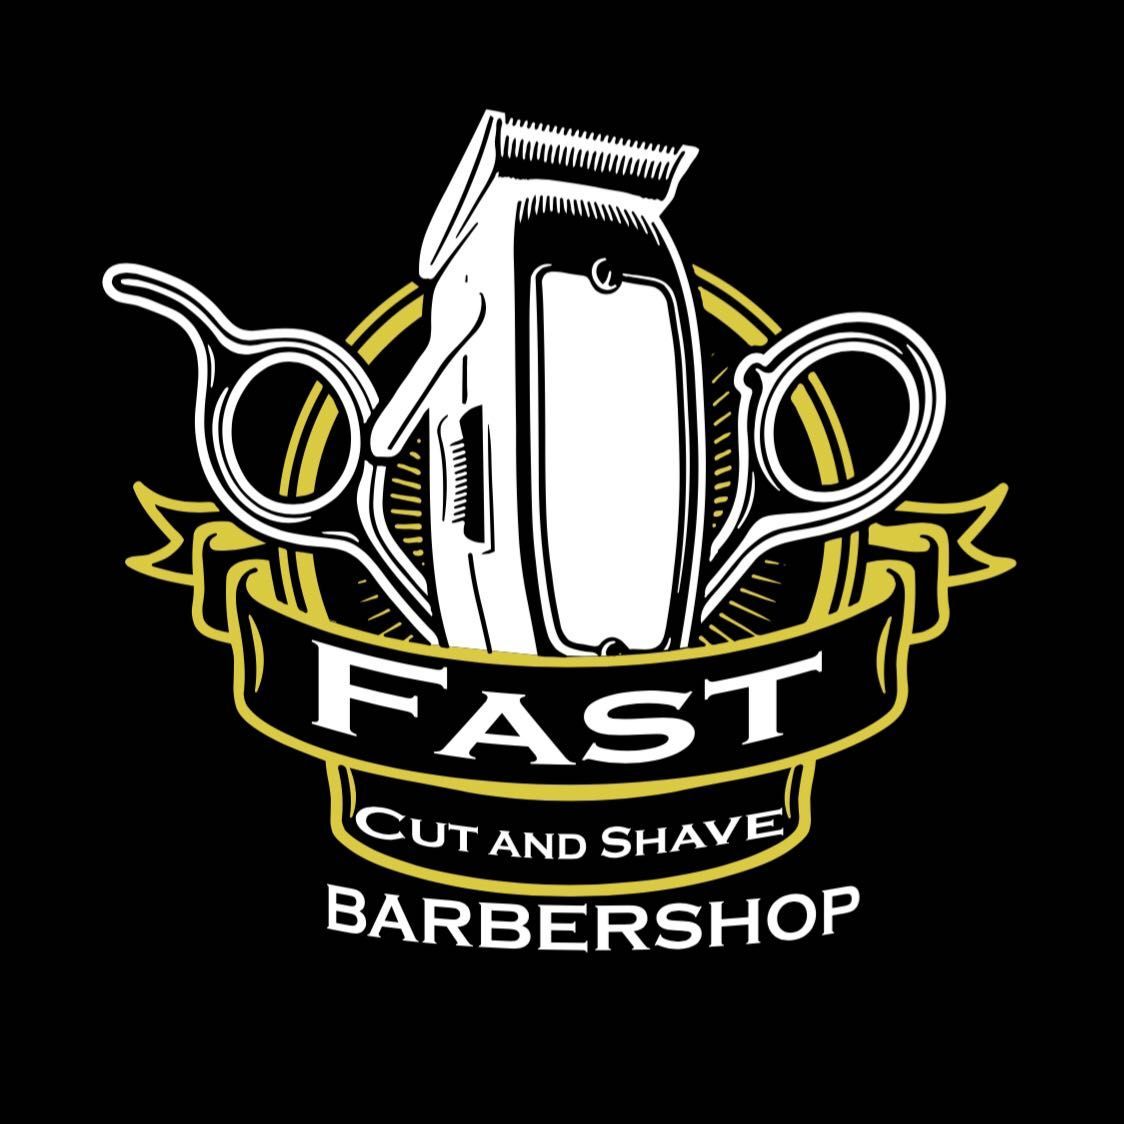 Fast cut and shave barbershop, 1106 W Murray Ave, Visalia, 93291